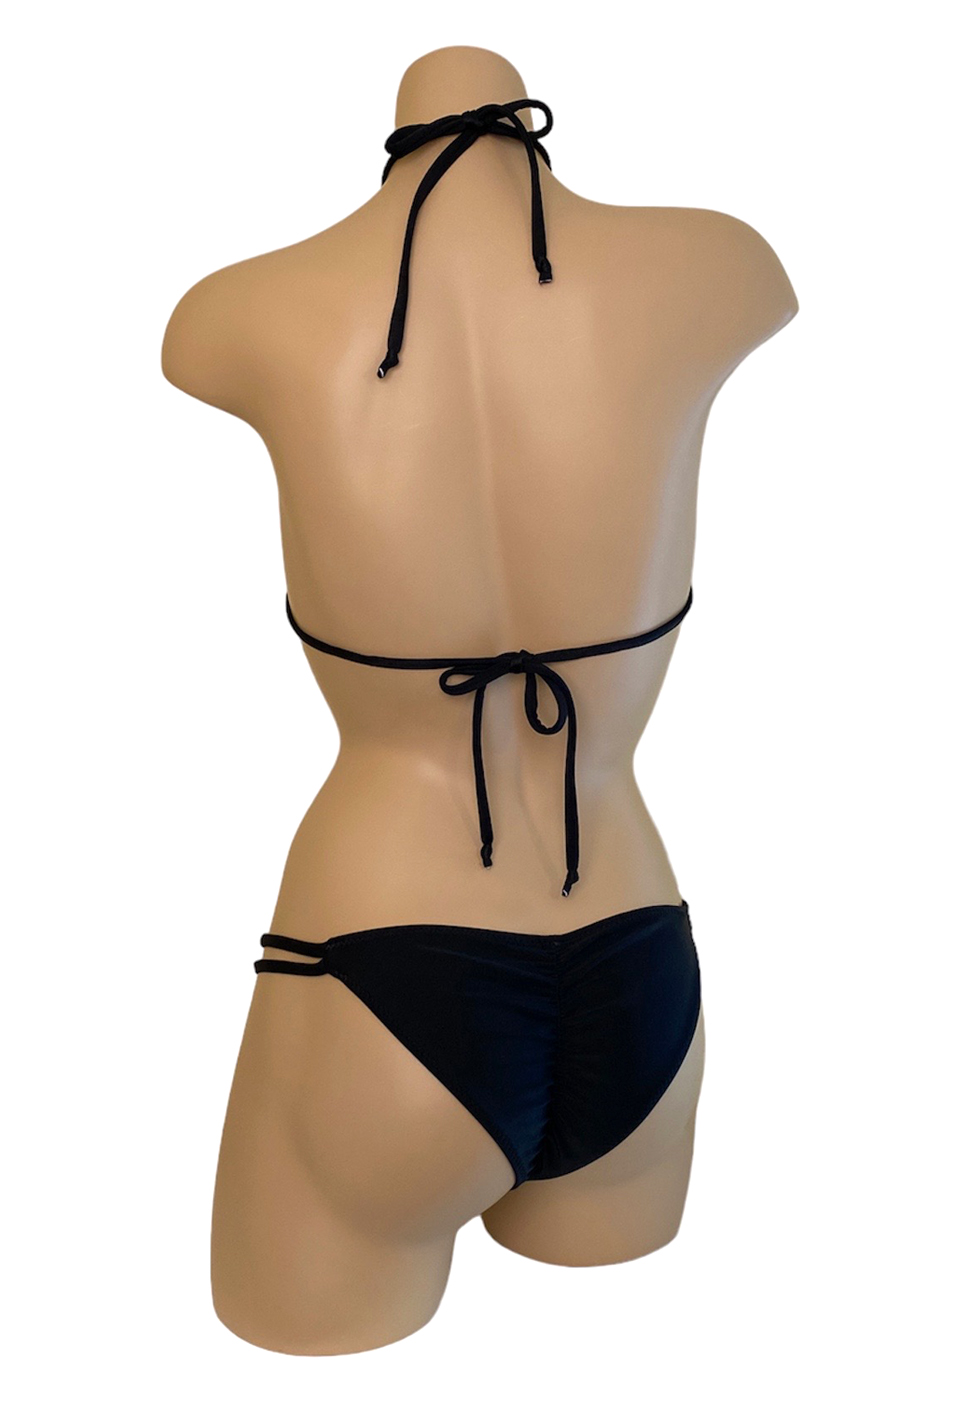 Low waist double strap ruched bikini bottoms and triangle top in black